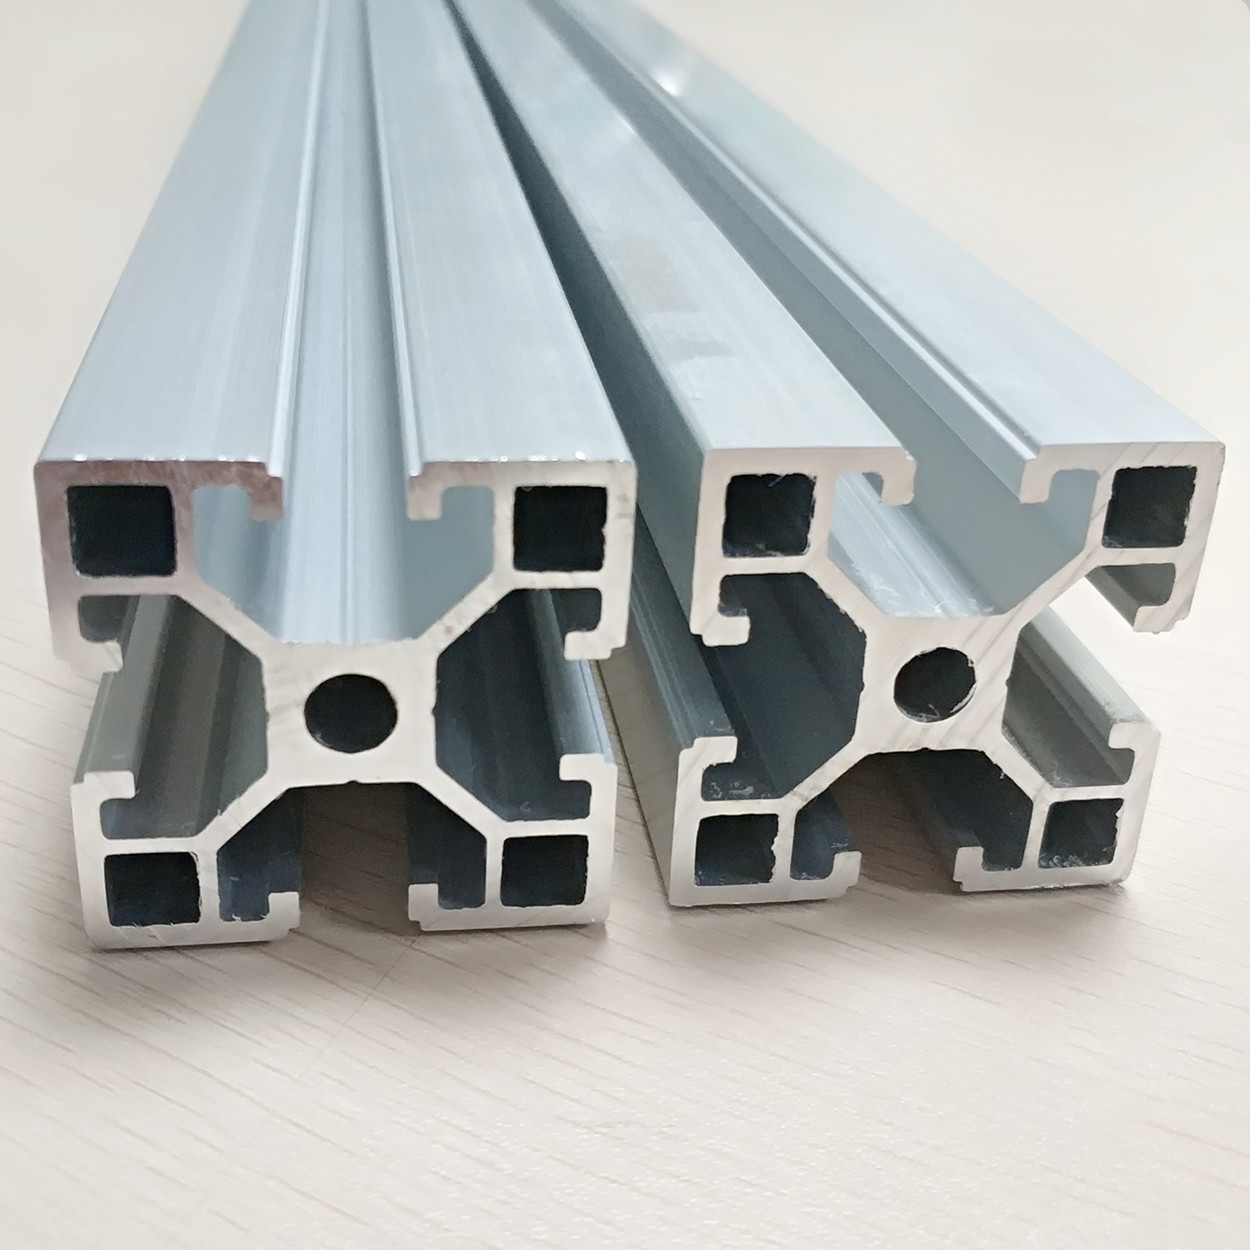 China Spare Parts Aluminium Extruded Profiles For Window Door Fenster Fabrication wholesale